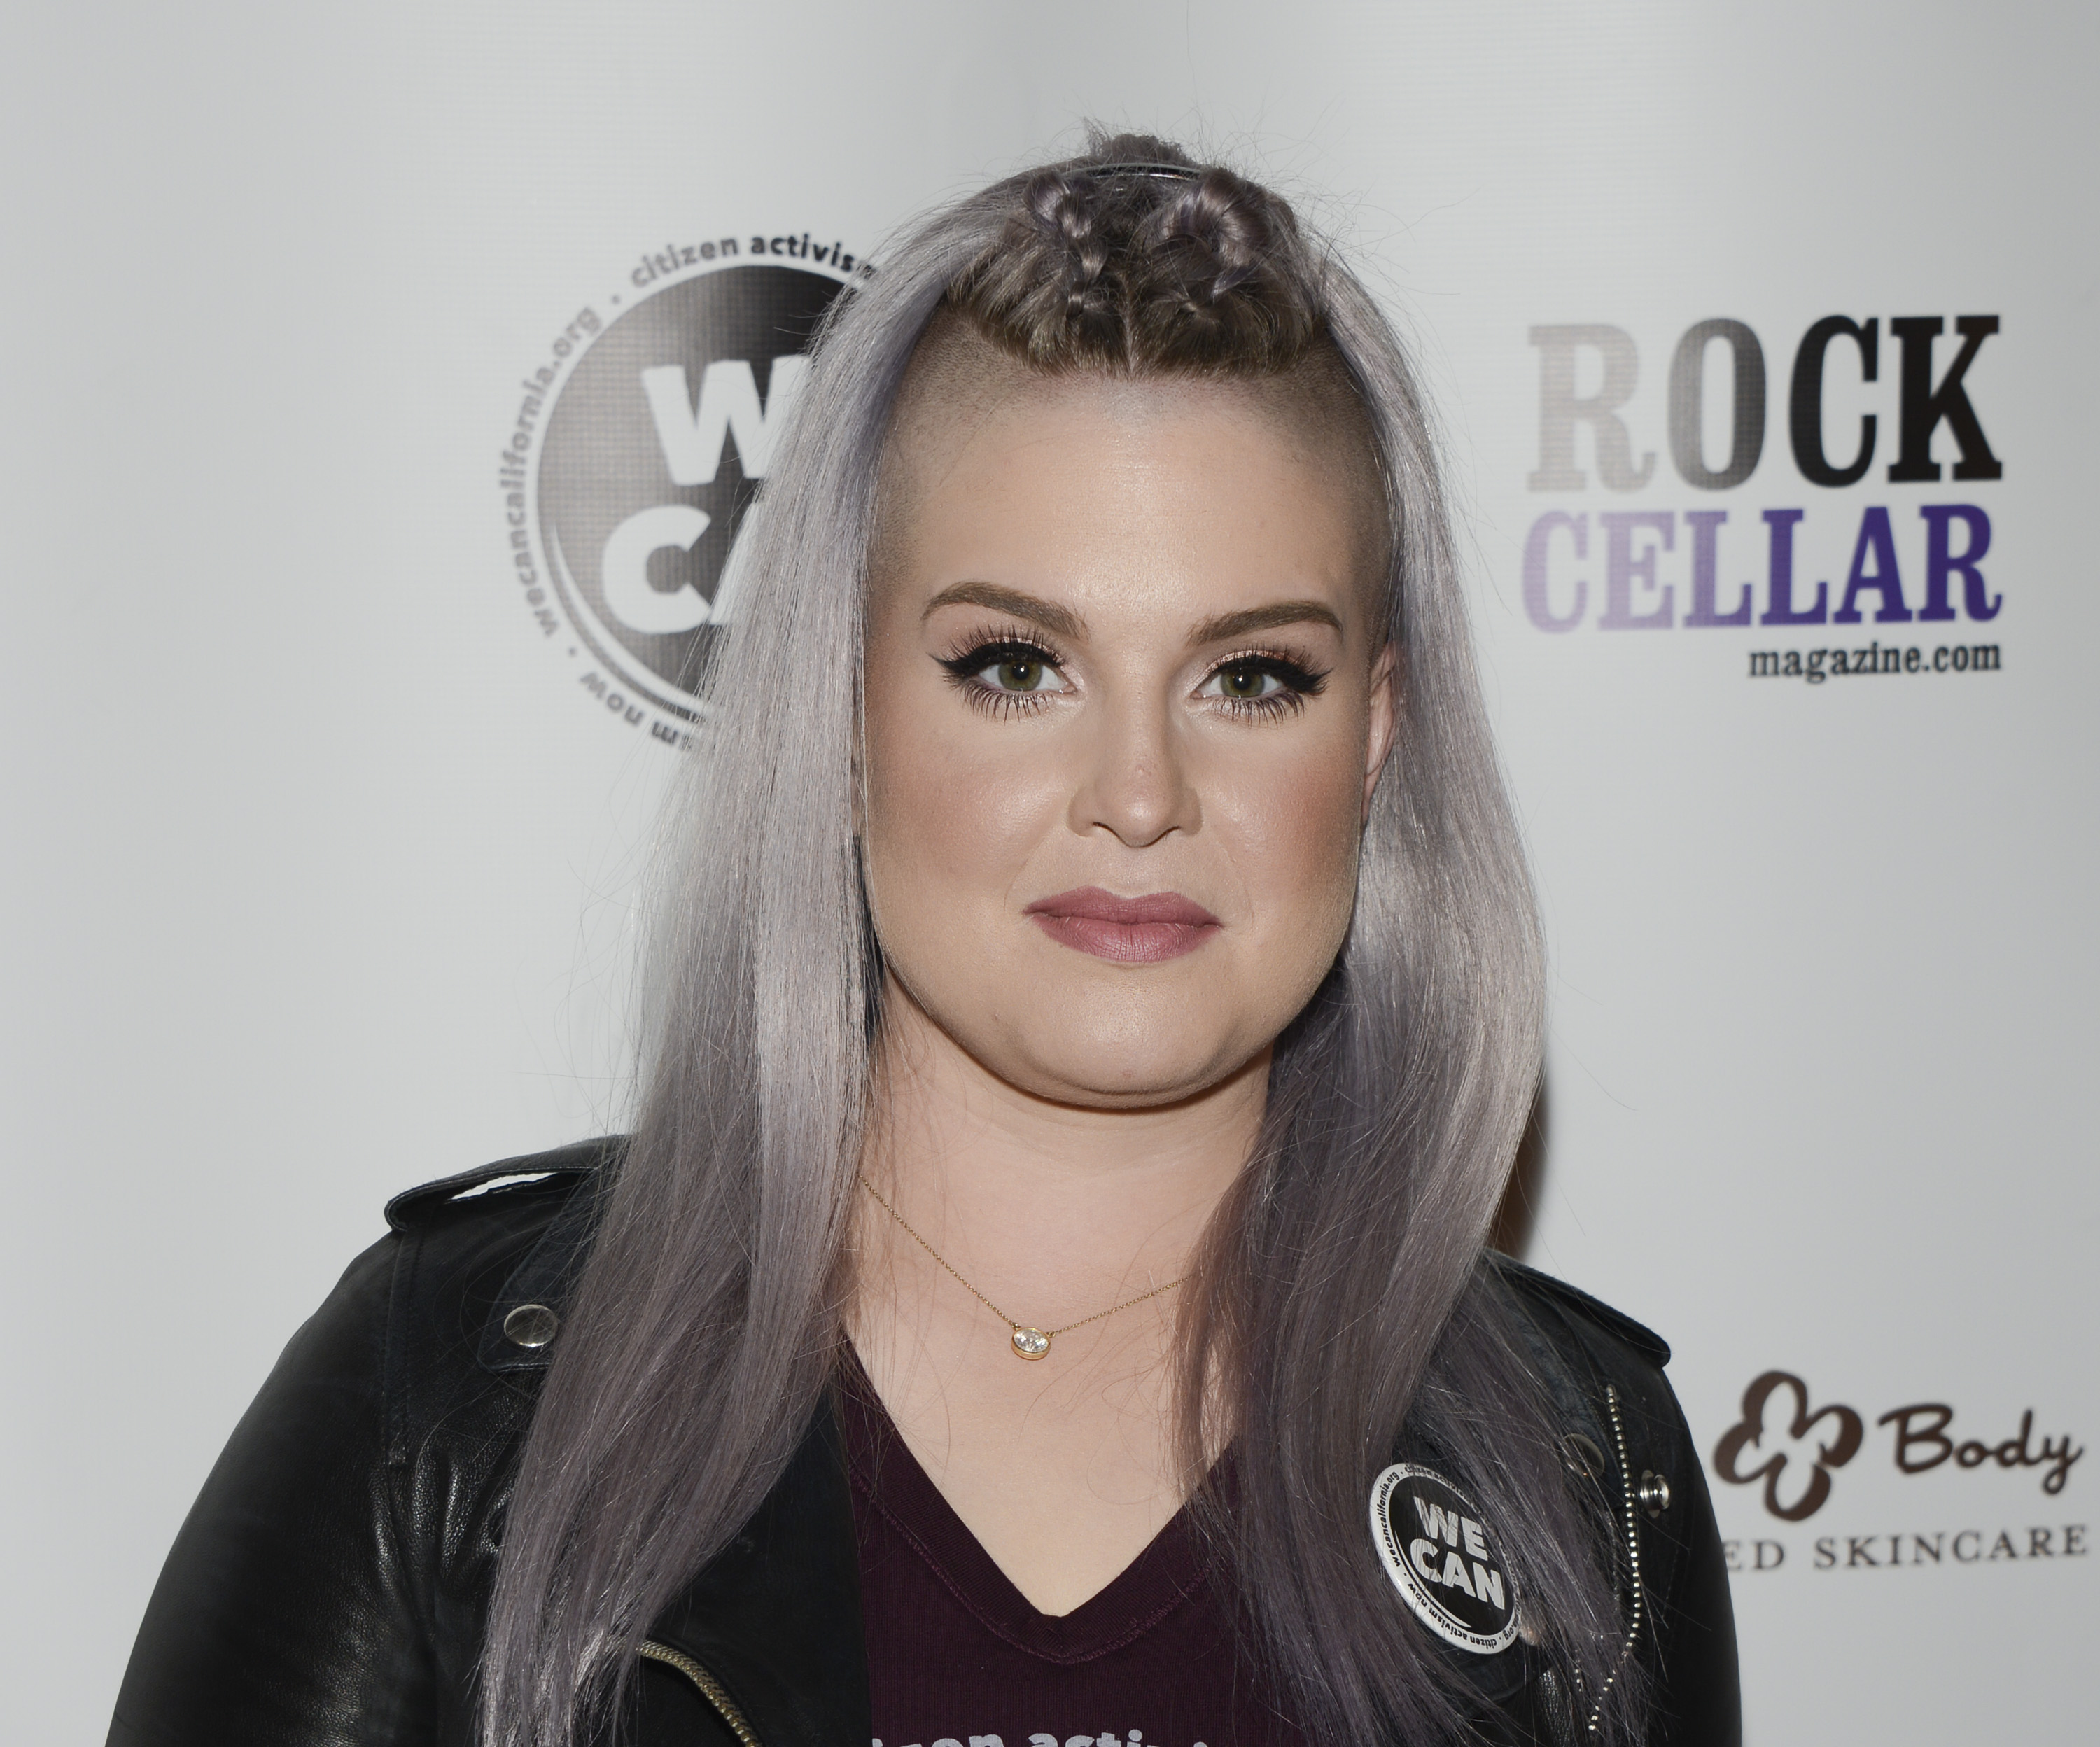 Kelly Osborne attends "The Care Concert - There's No Place That's Home" at The Palace Theatre in Los Angeles, California, on June 10, 2017. | Source: Getty Images